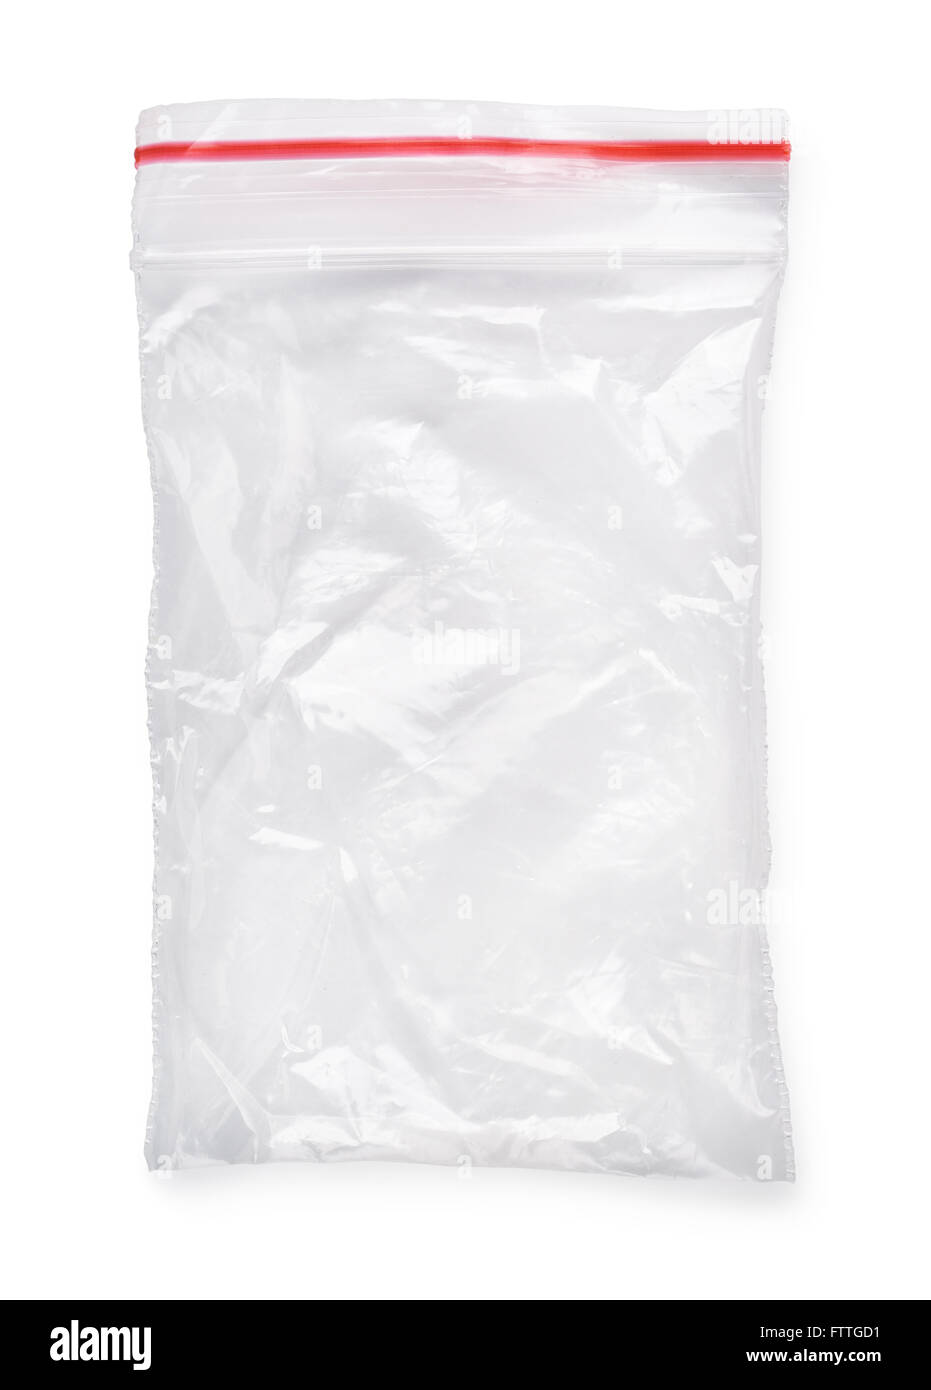 Used clear ziplock bag isolated on white Stock Photo